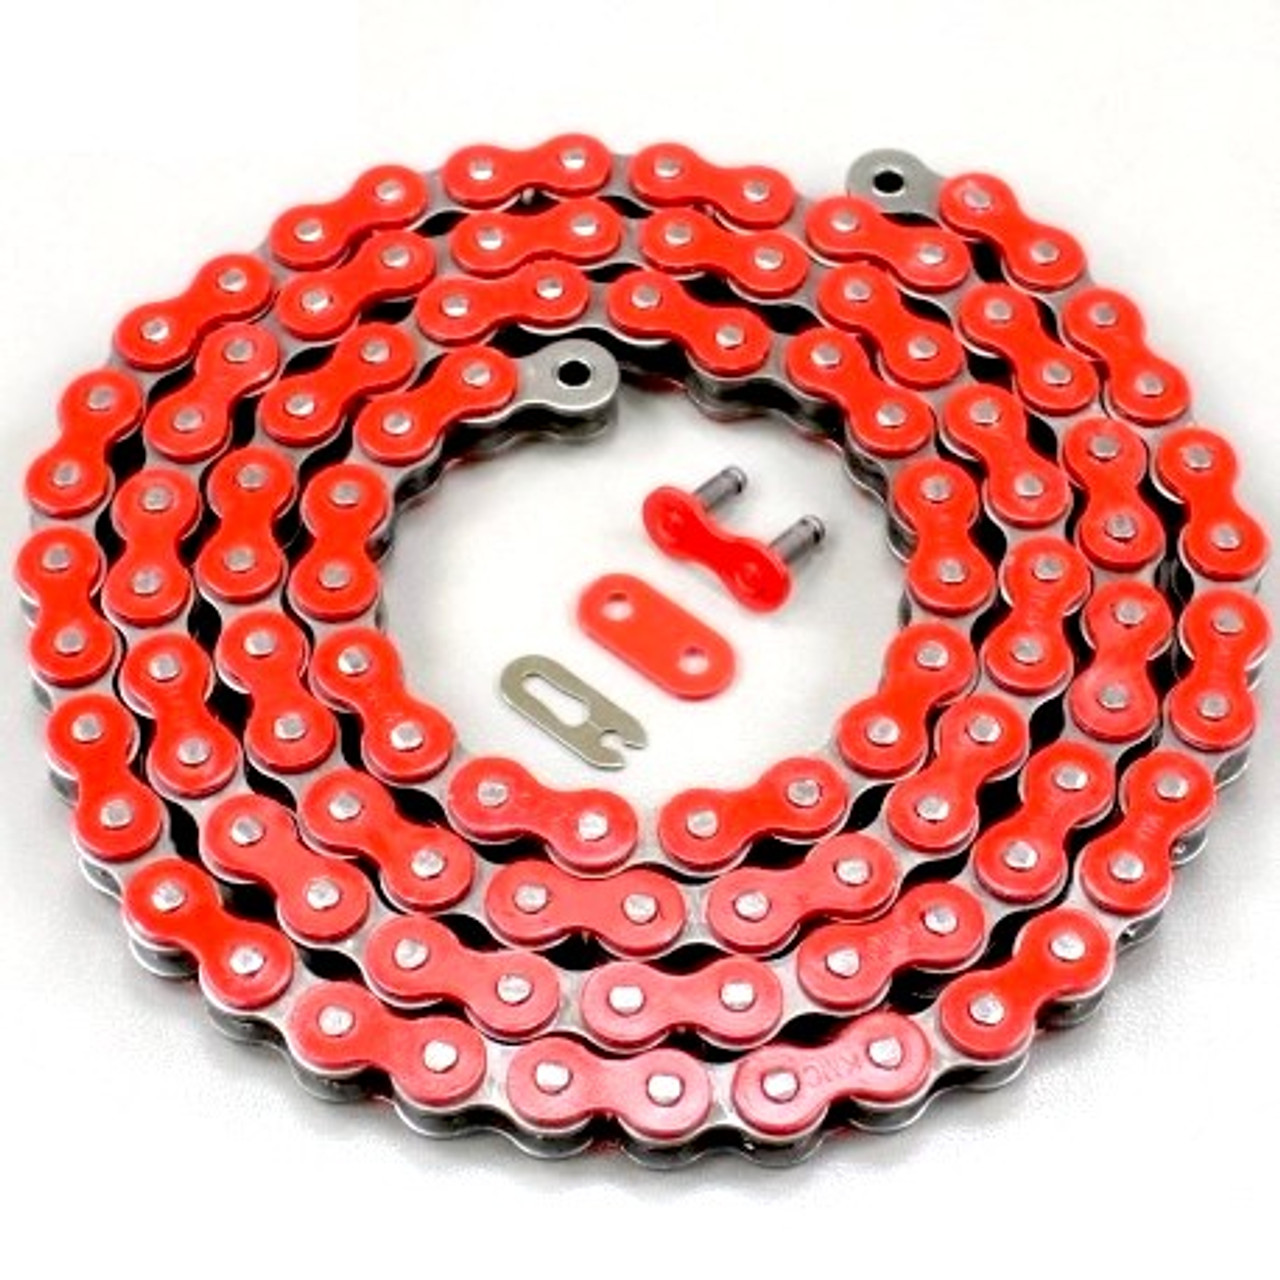 KMC 415 HD x 106 Link Moped Drive Chain - RED